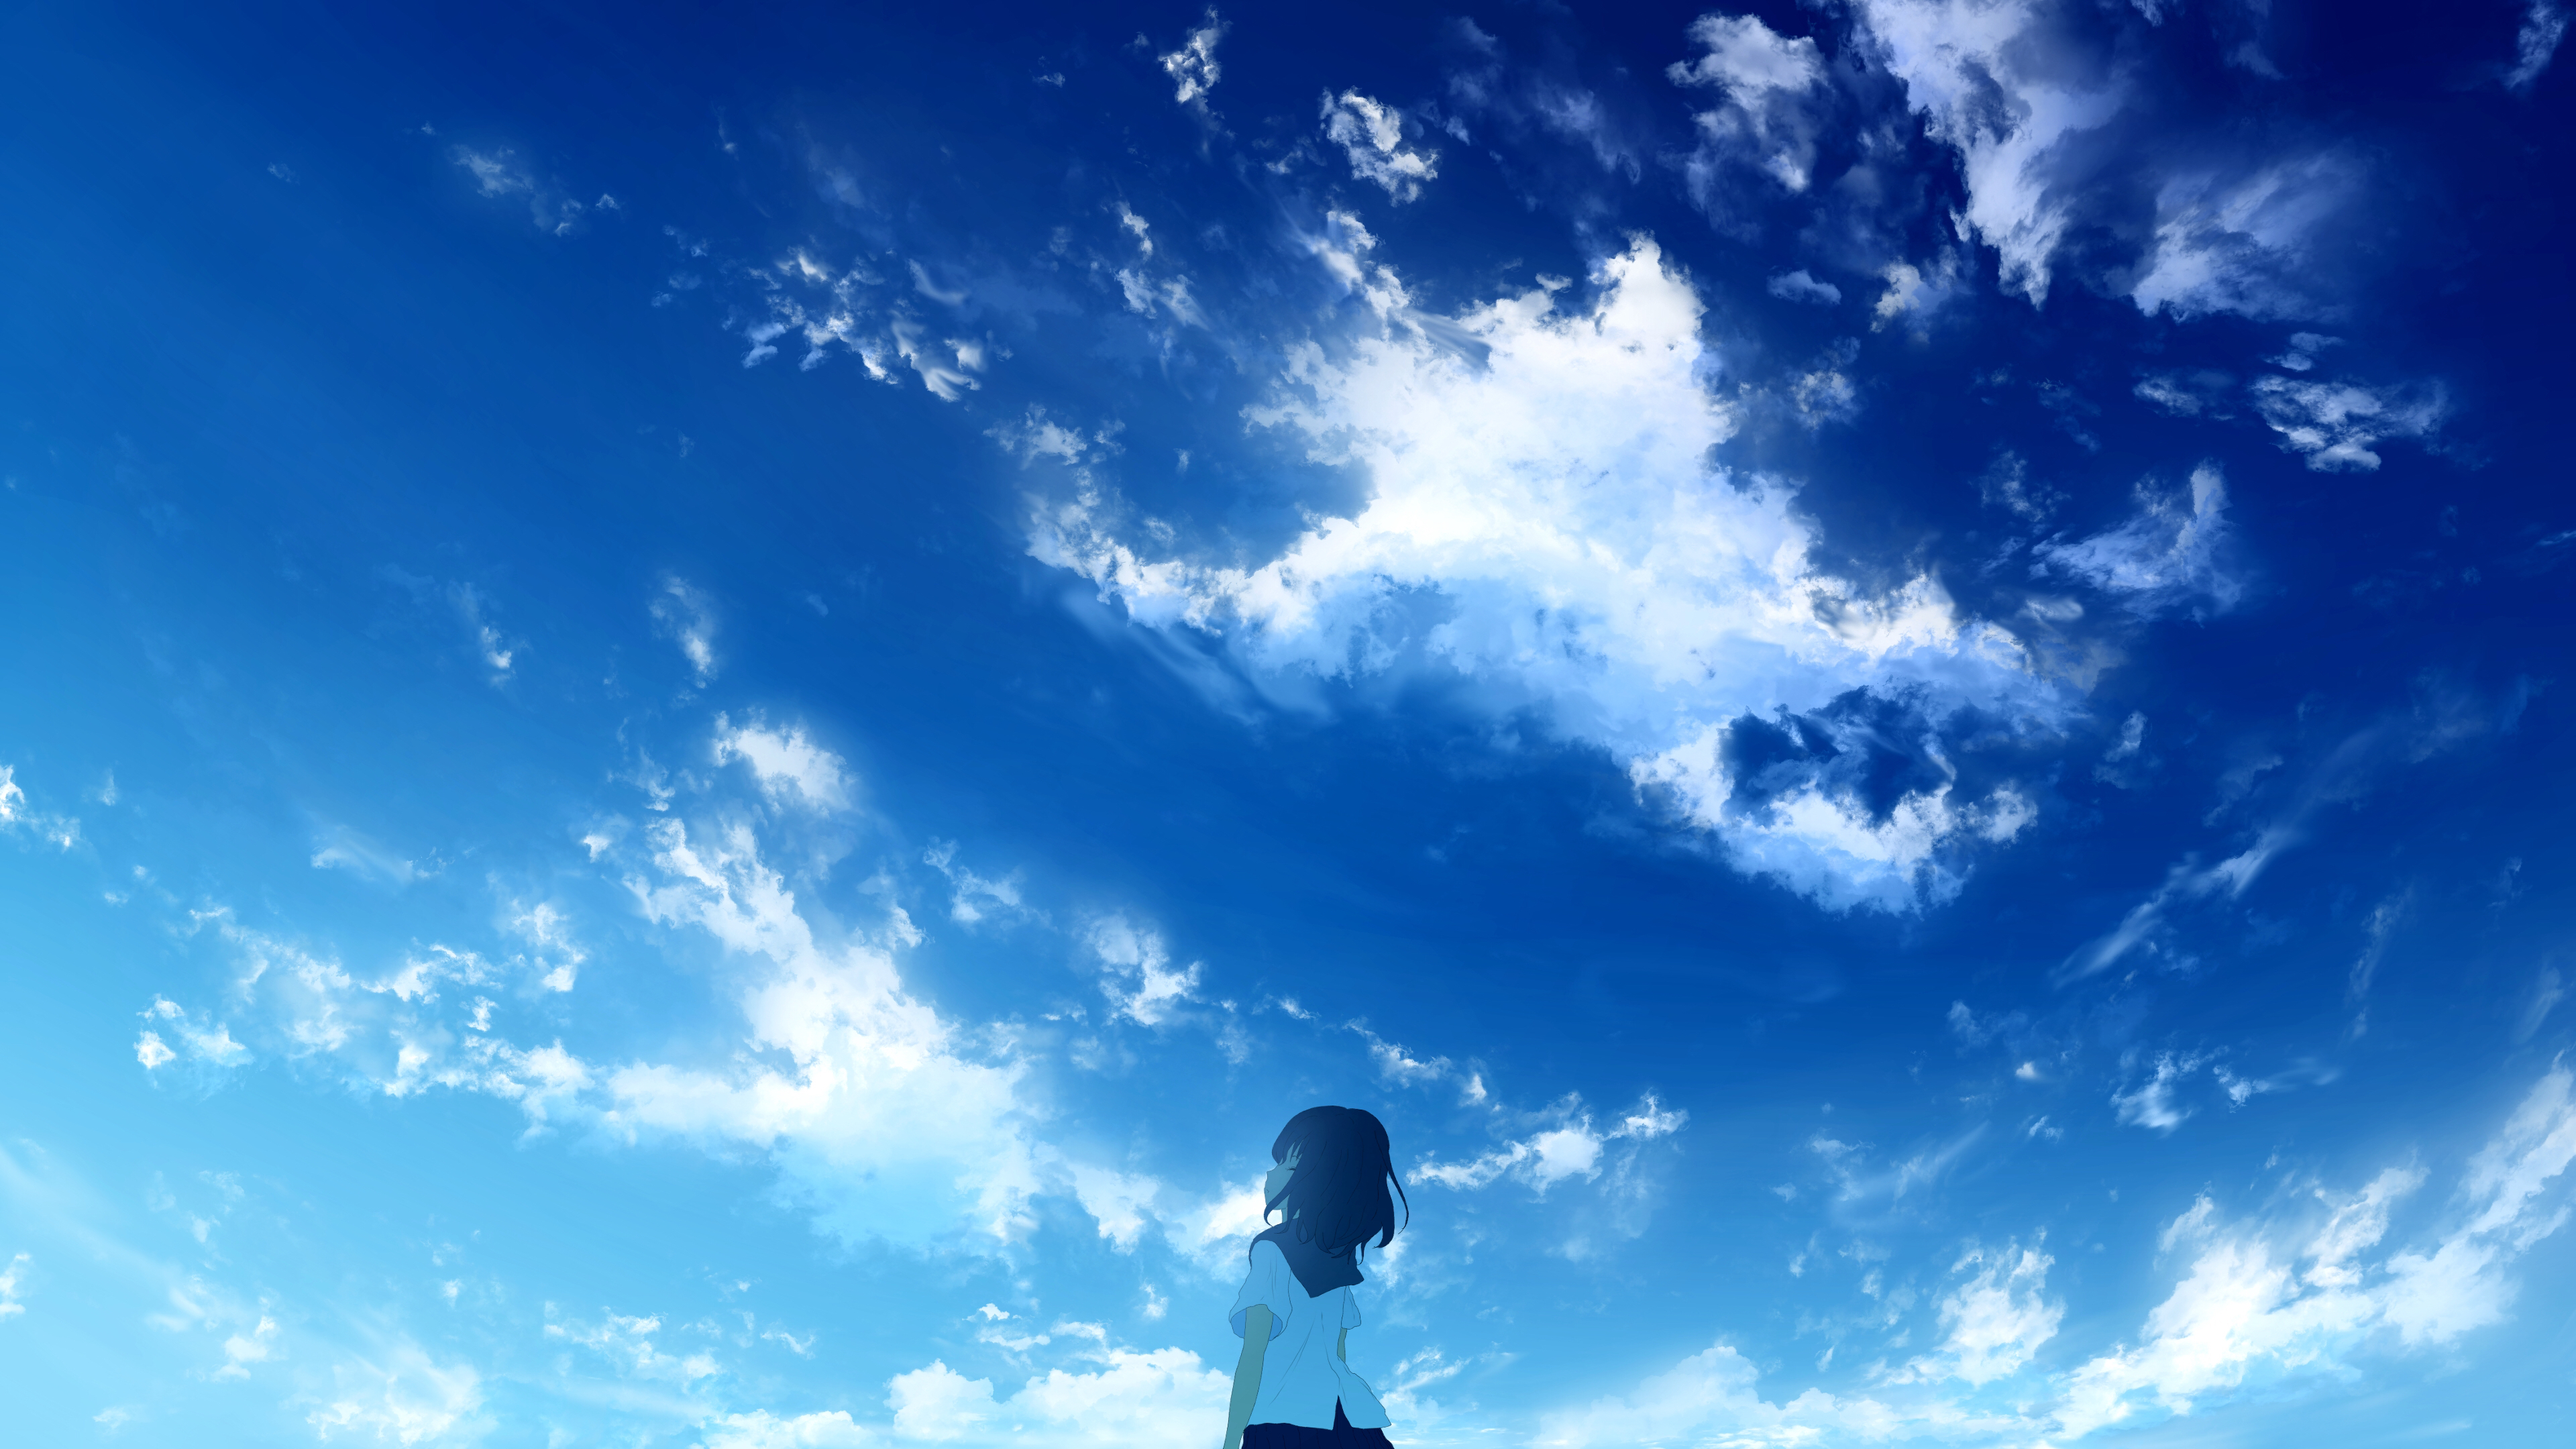 Update more than 78 anime cloud wallpaper latest - in.cdgdbentre